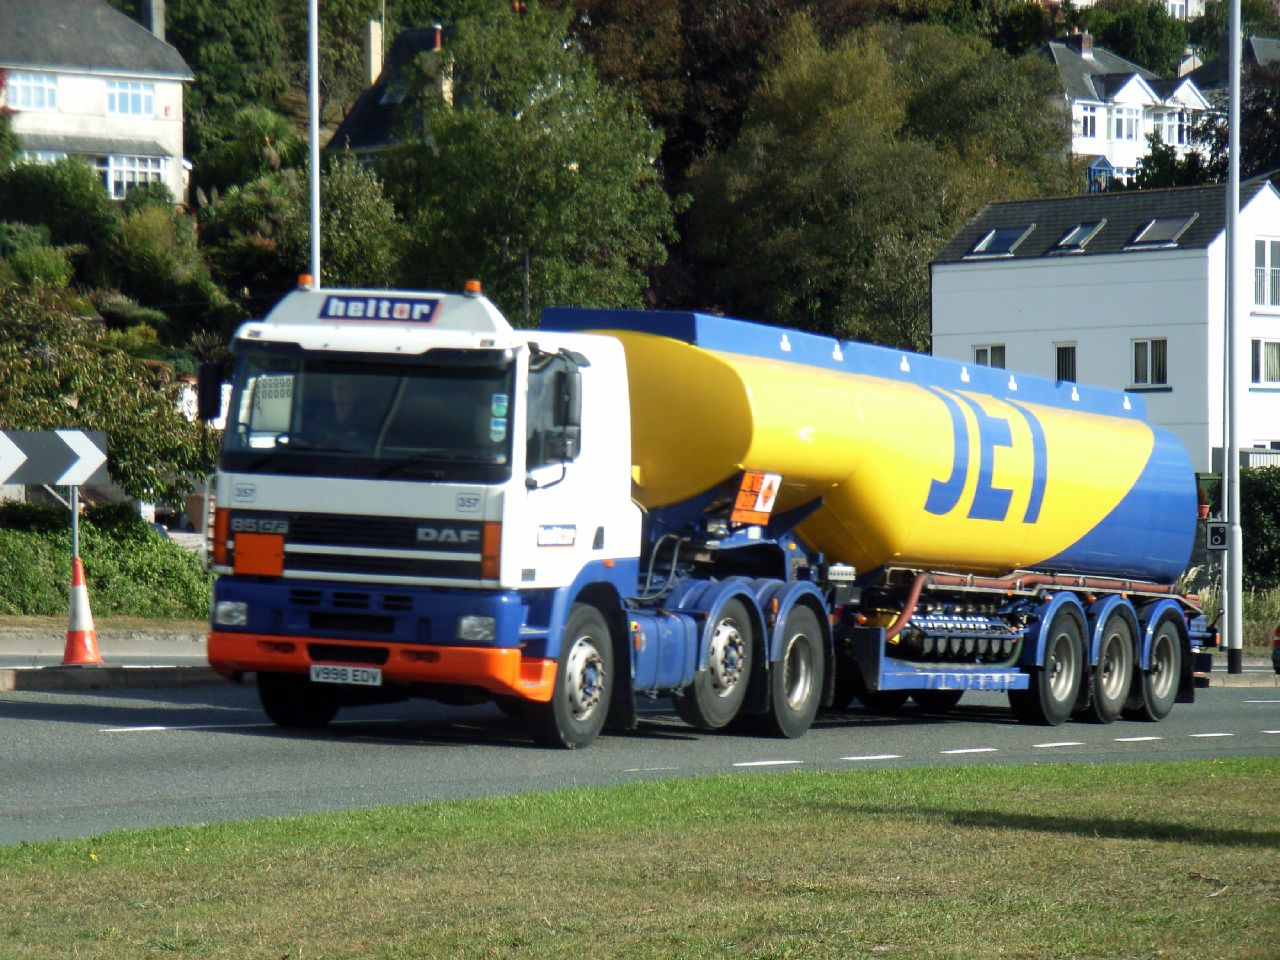 a semi truck hauling a large yellow and blue container